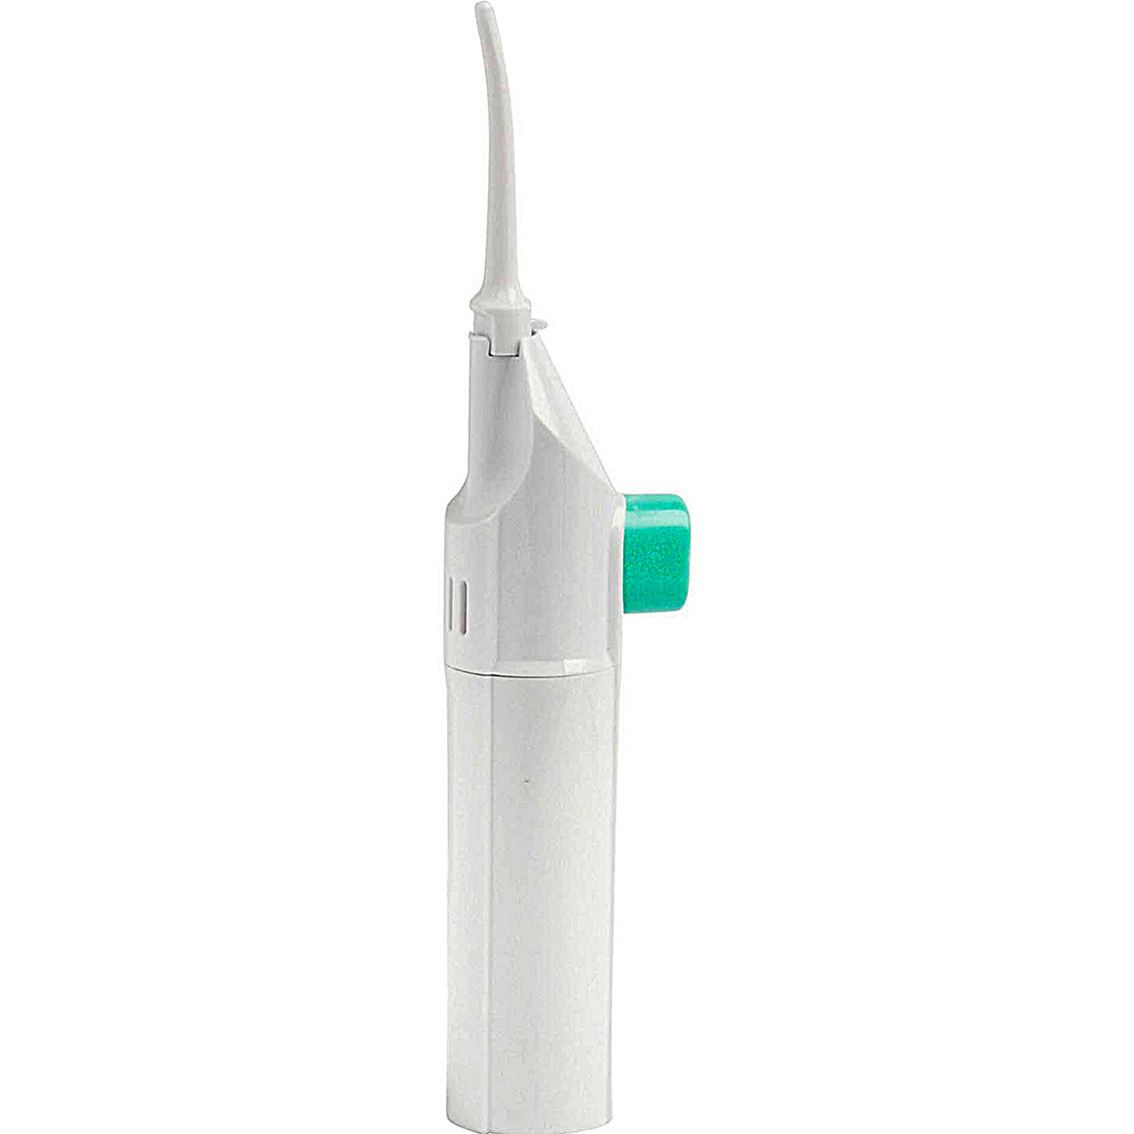 IGIA Air Powered Water Flosser - Image 2 of 3